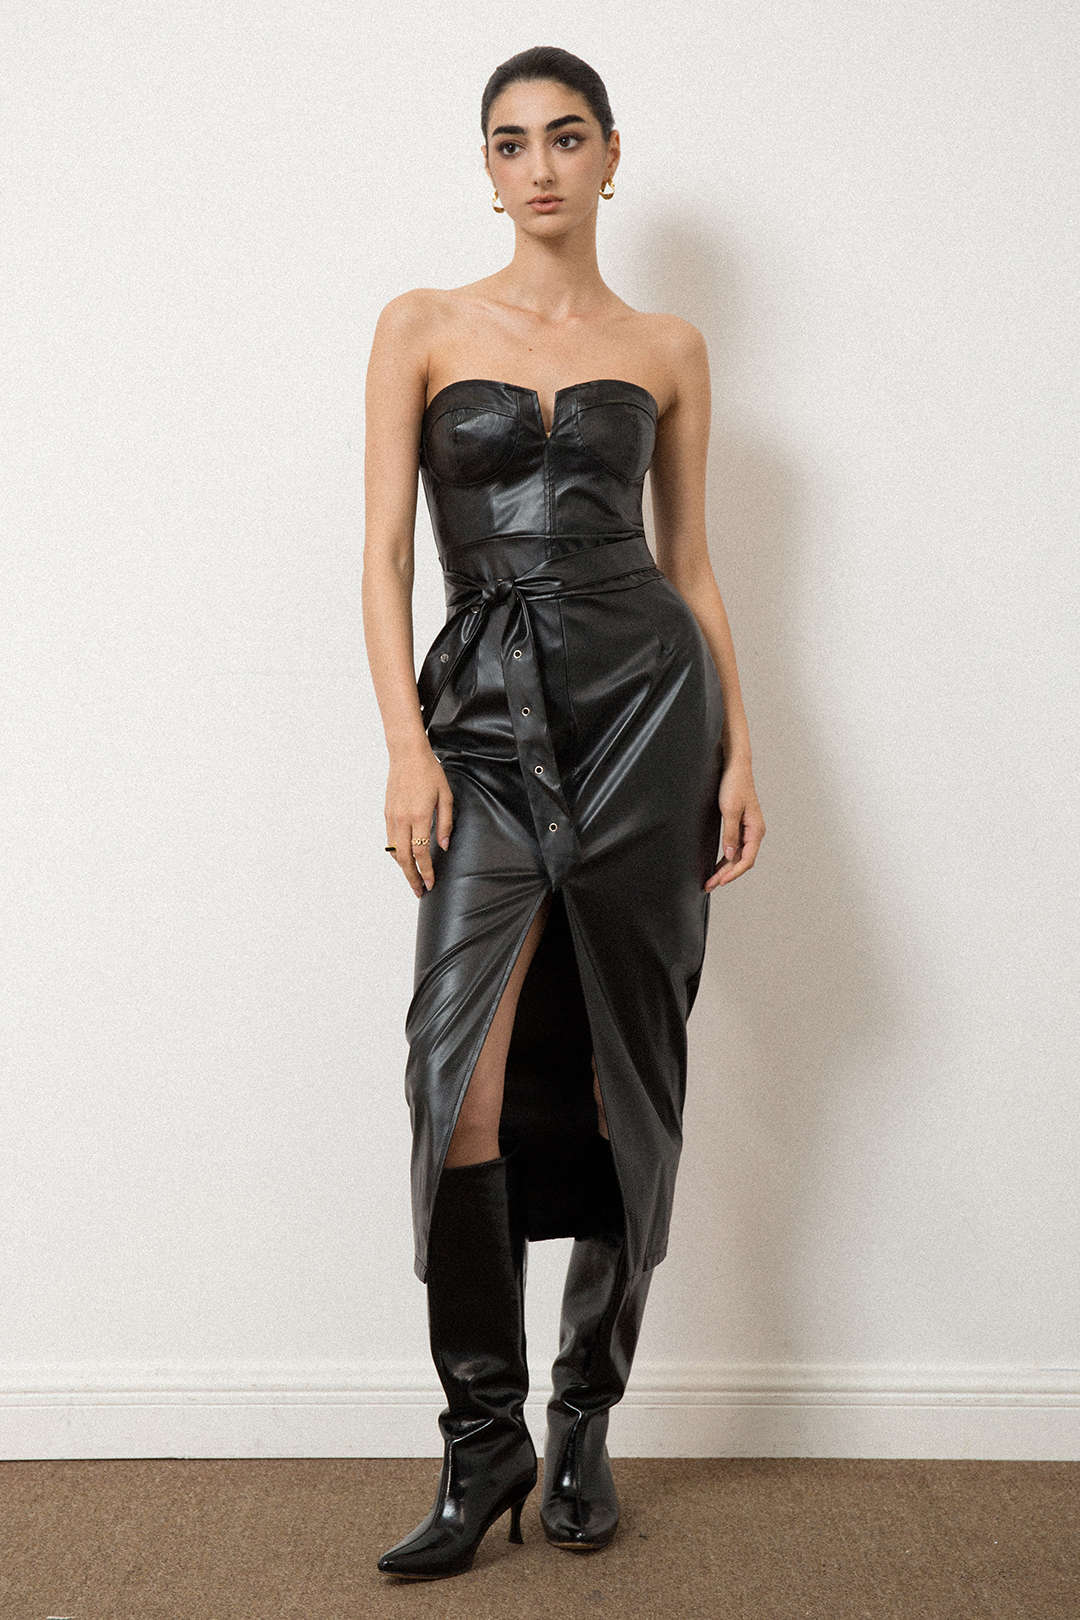 Faux Leather Strapless Slit Belted Midi Dress